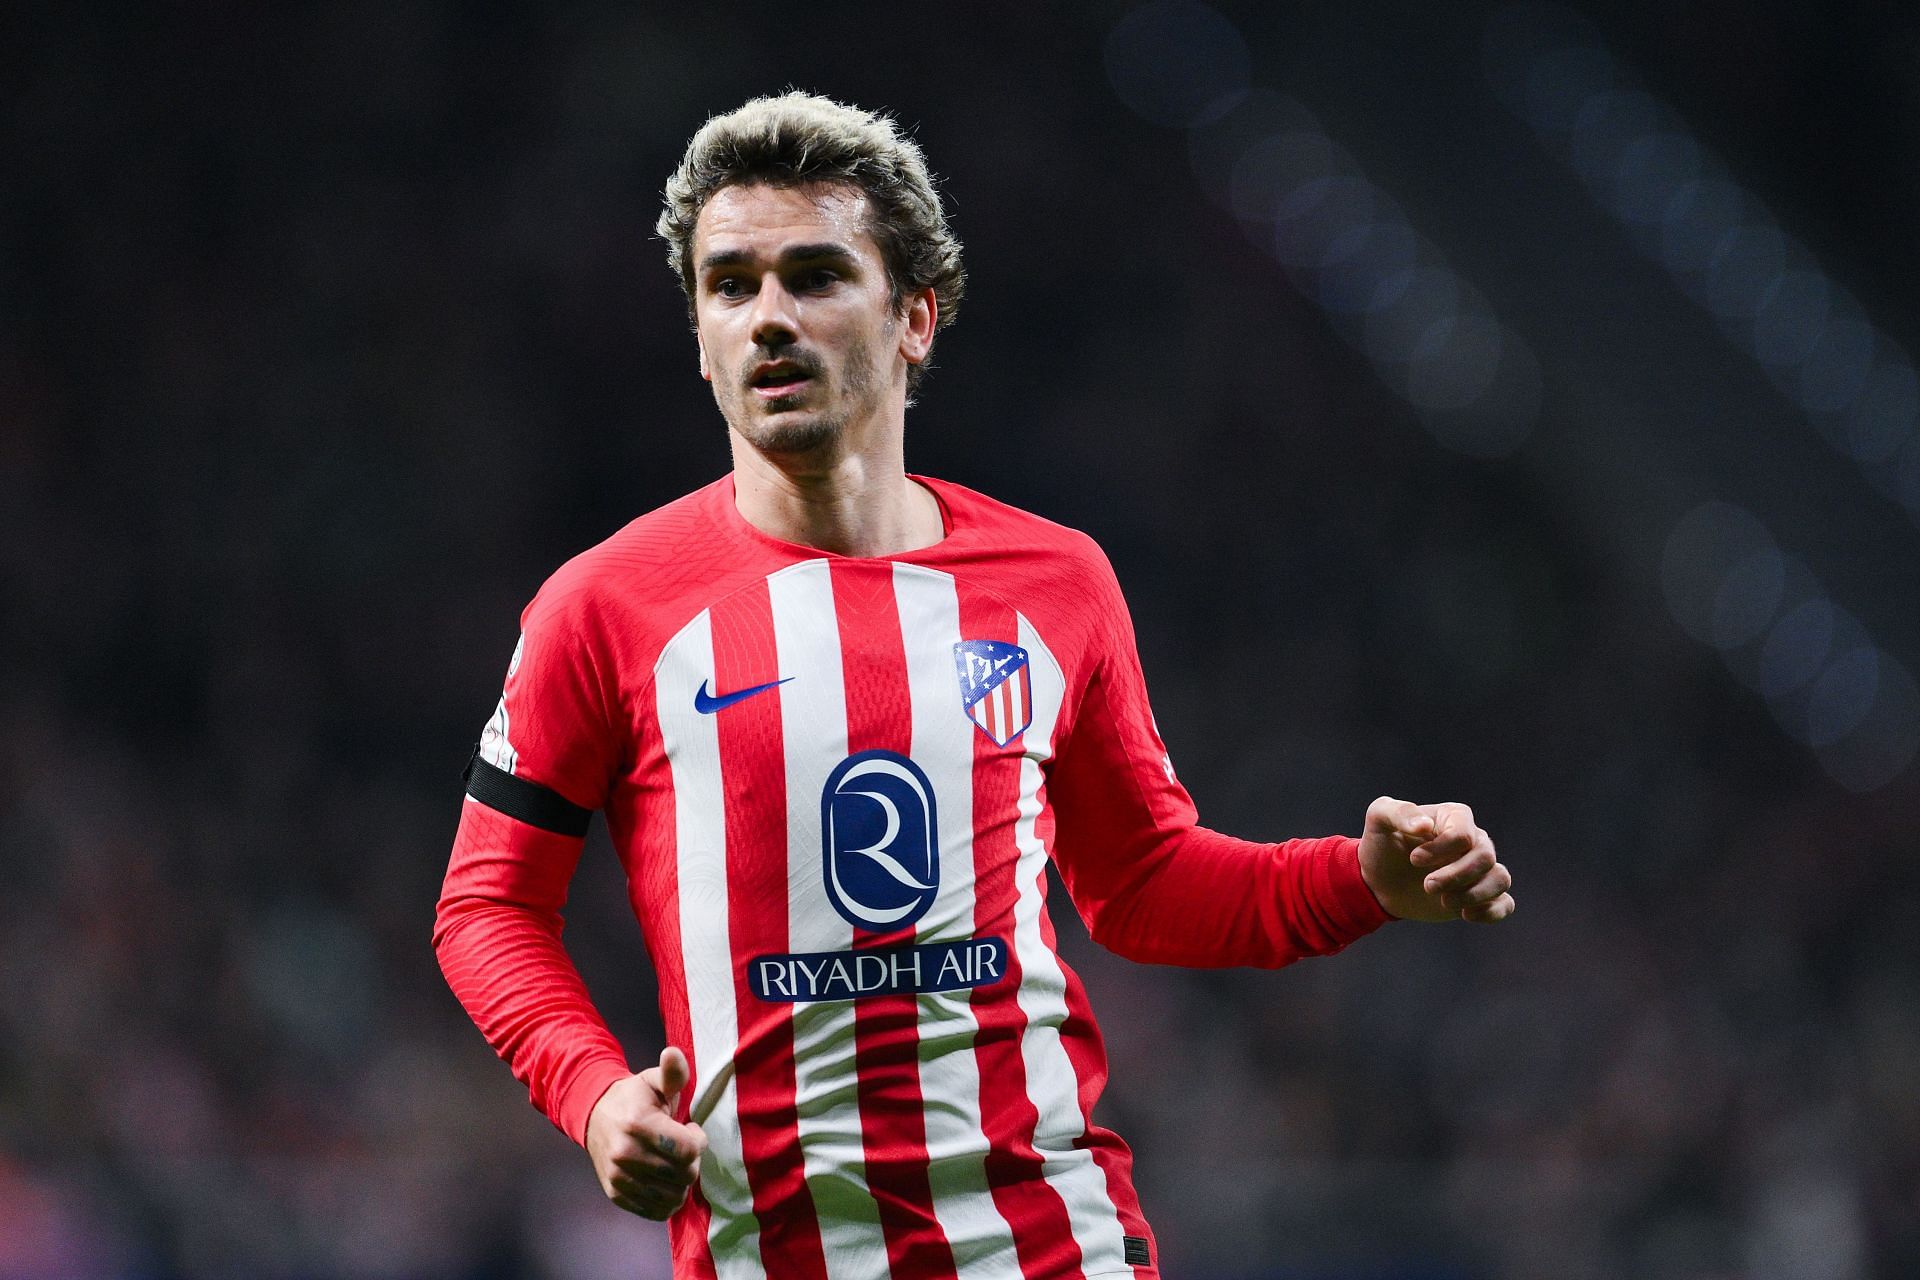 MLS side pushing to sign Antoine Griezmann from Atletico Madrid - Reports